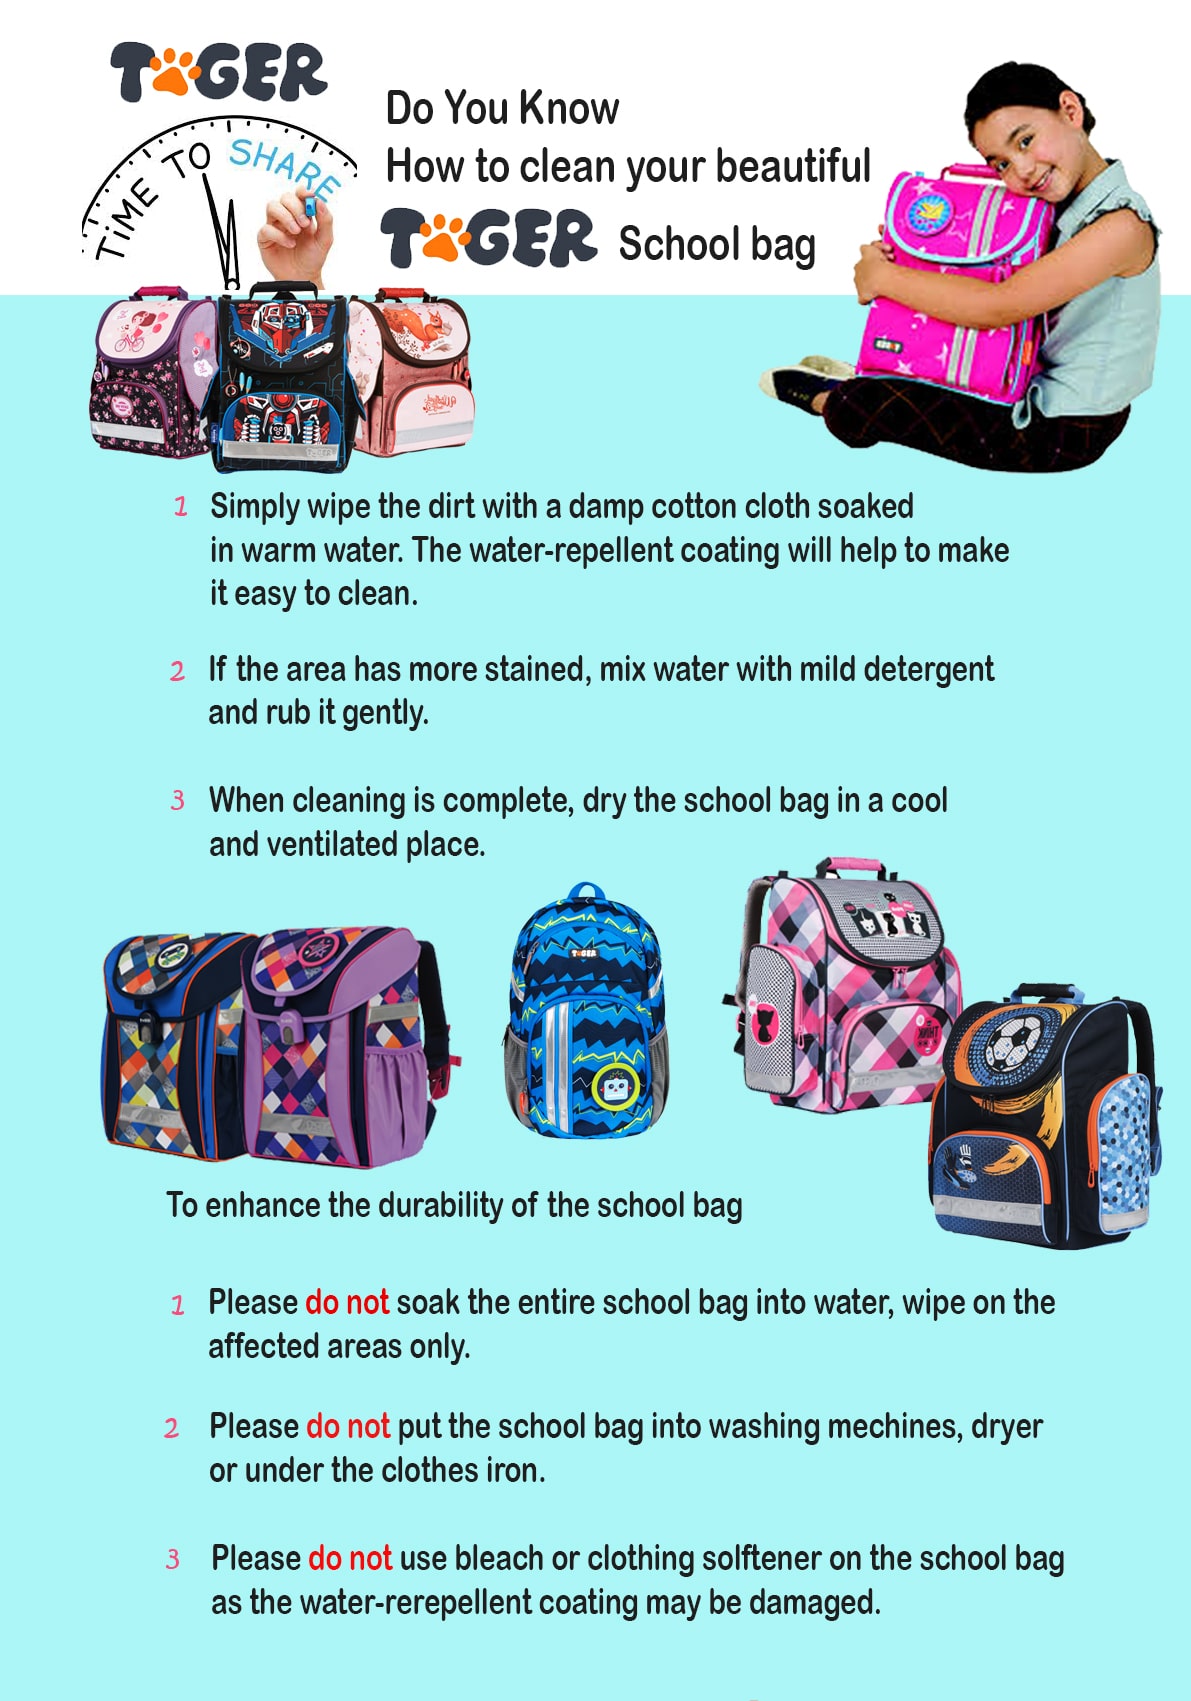 Home - About School Bag 1.jpg